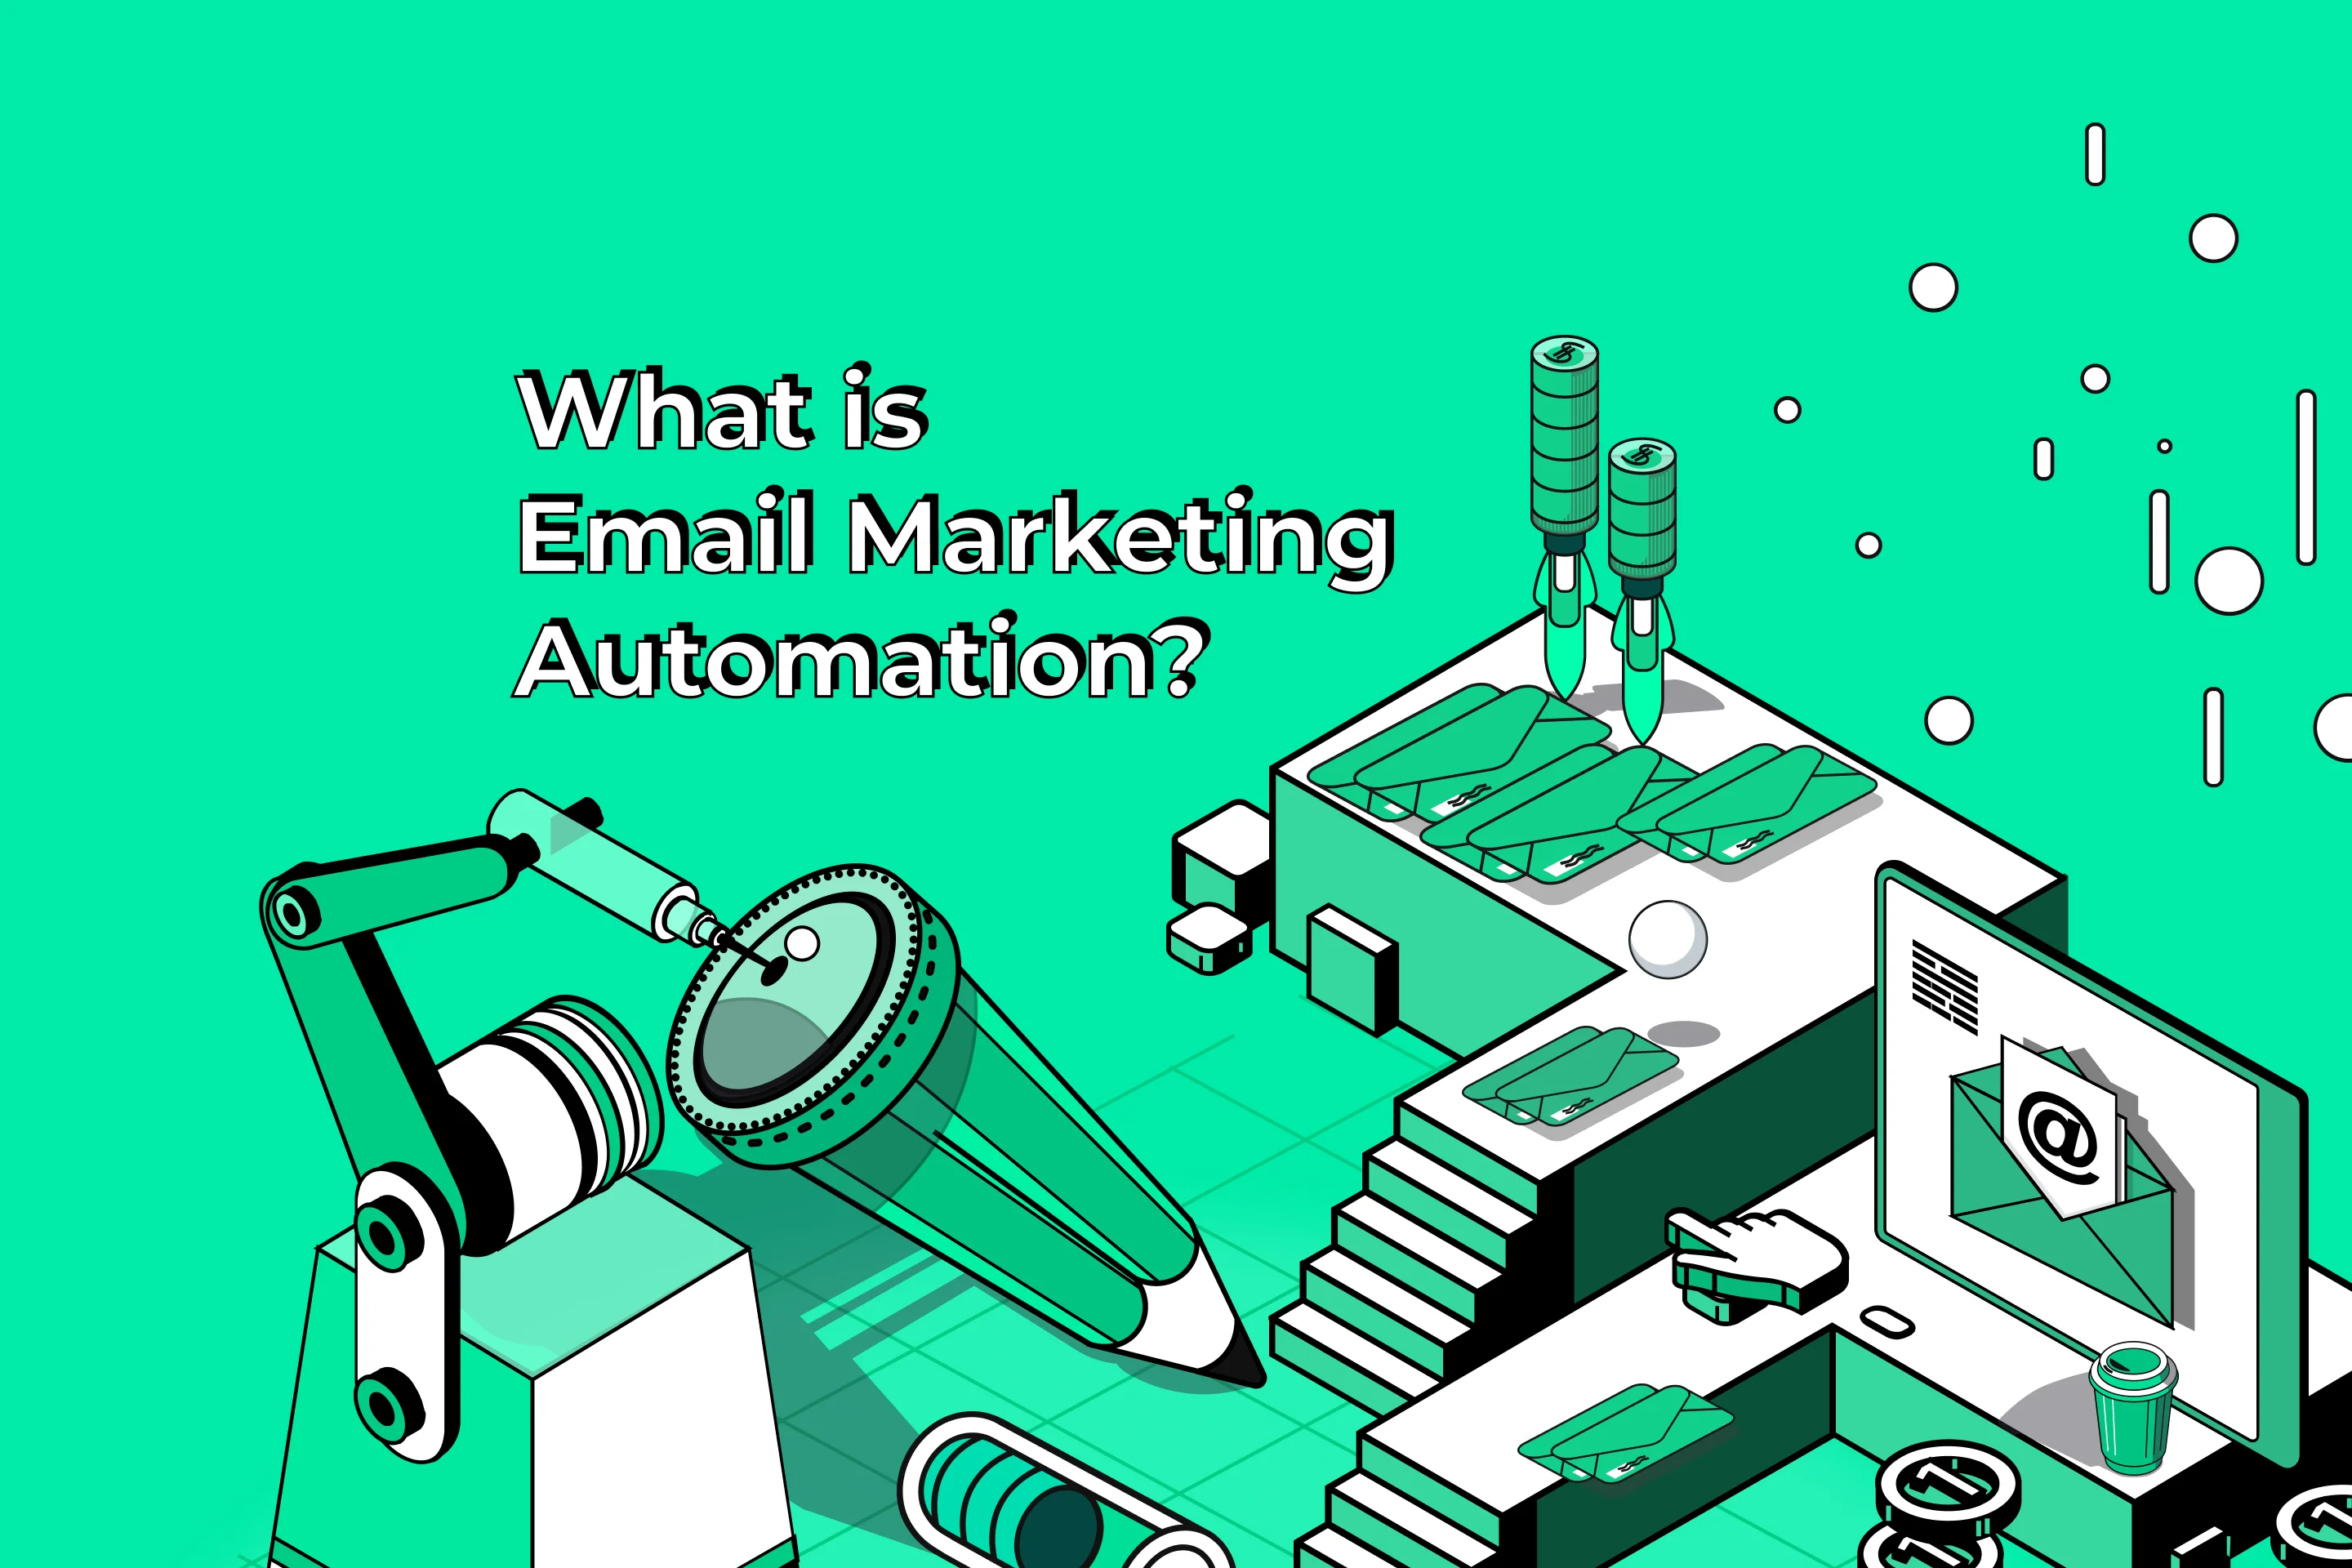 What is Email Marketing Automation